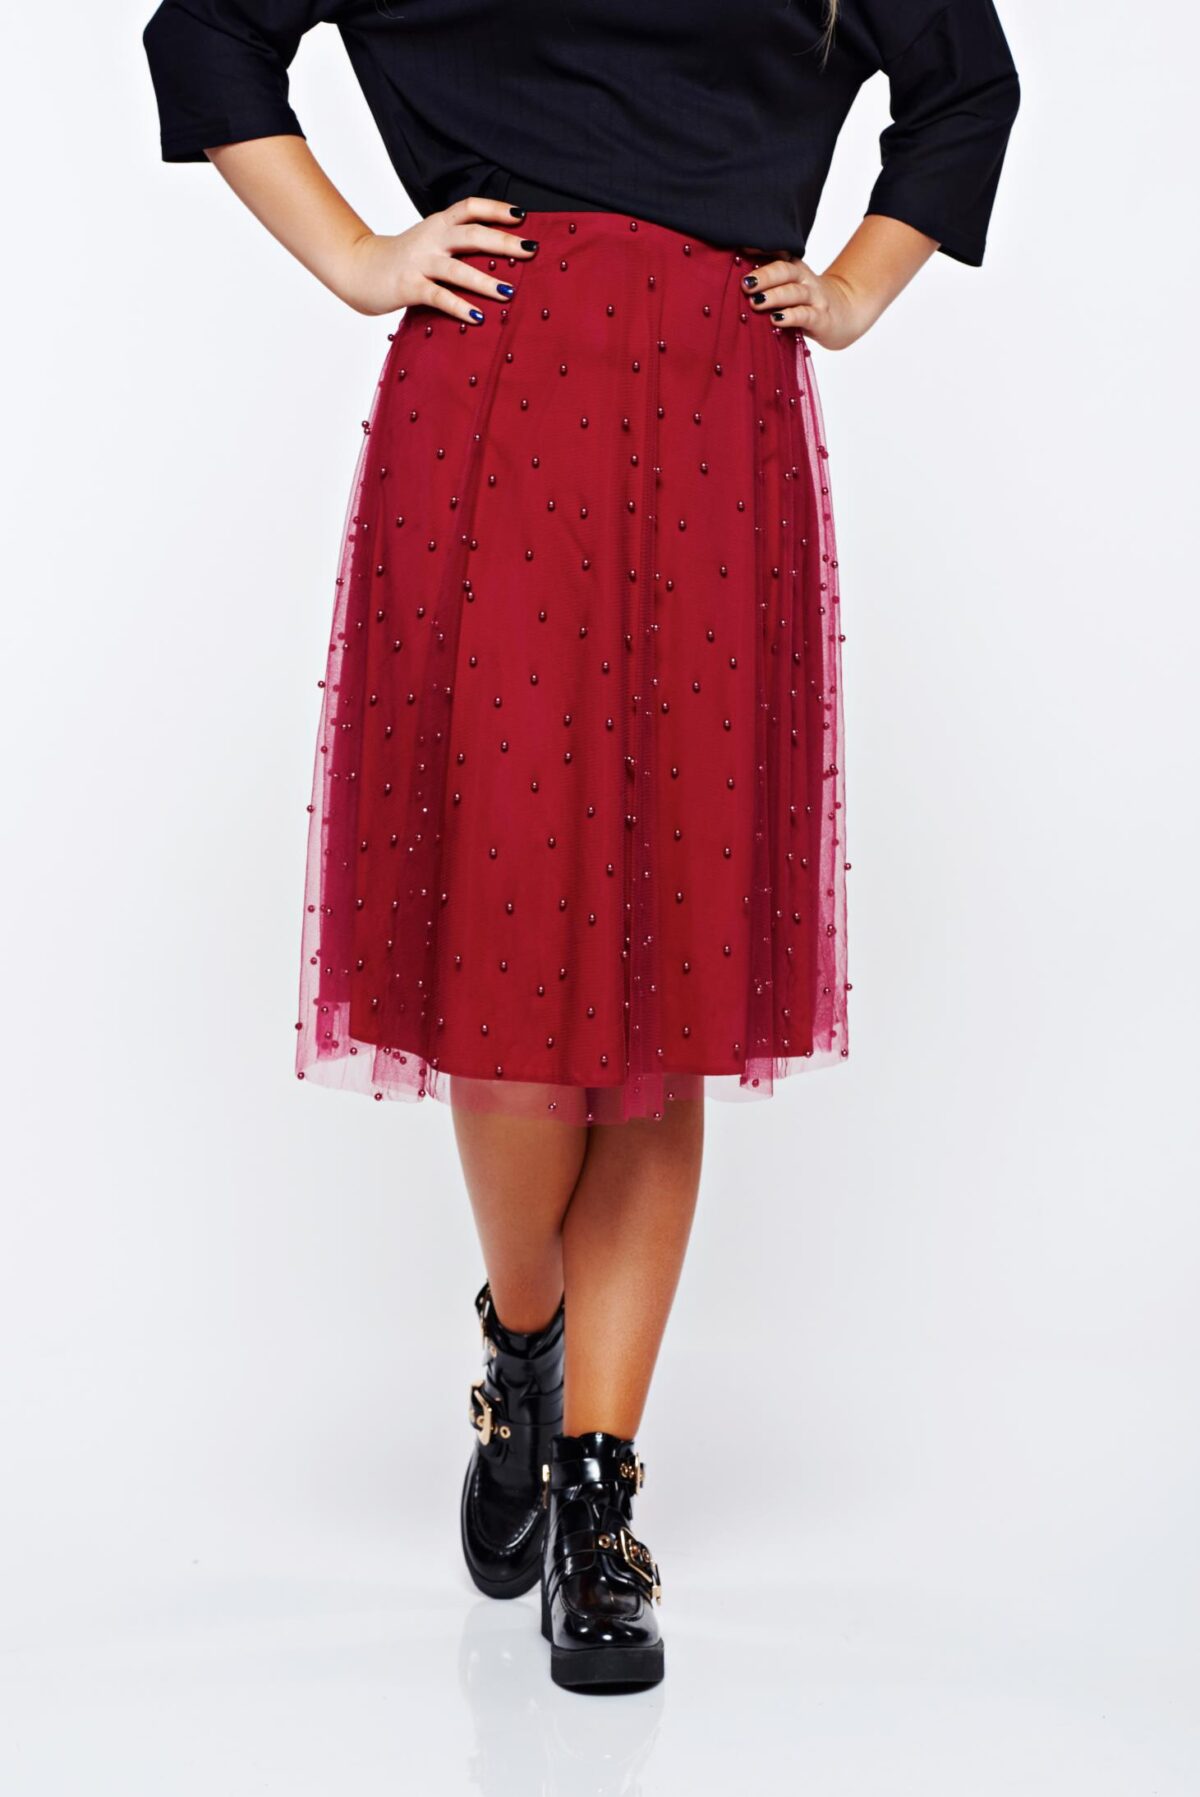 Burgundy Skirt Casual Of Tulle With Small Beads Embellished Details And Inside Lining